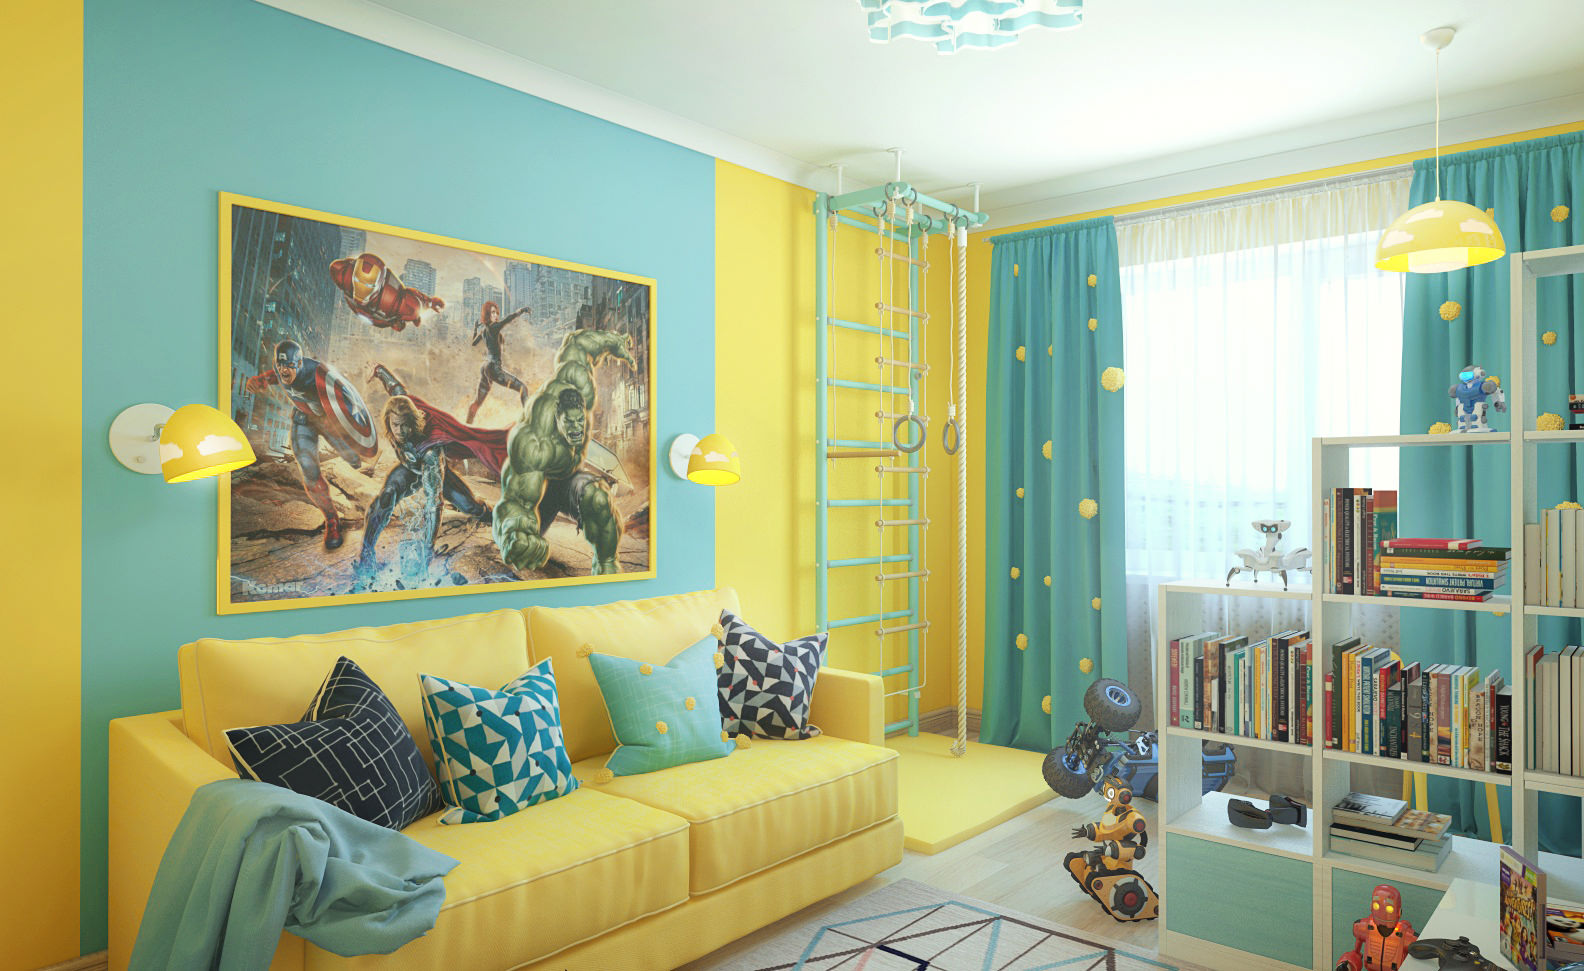 Design ideas for a child’s room for a boy with thematic photo wallpapers